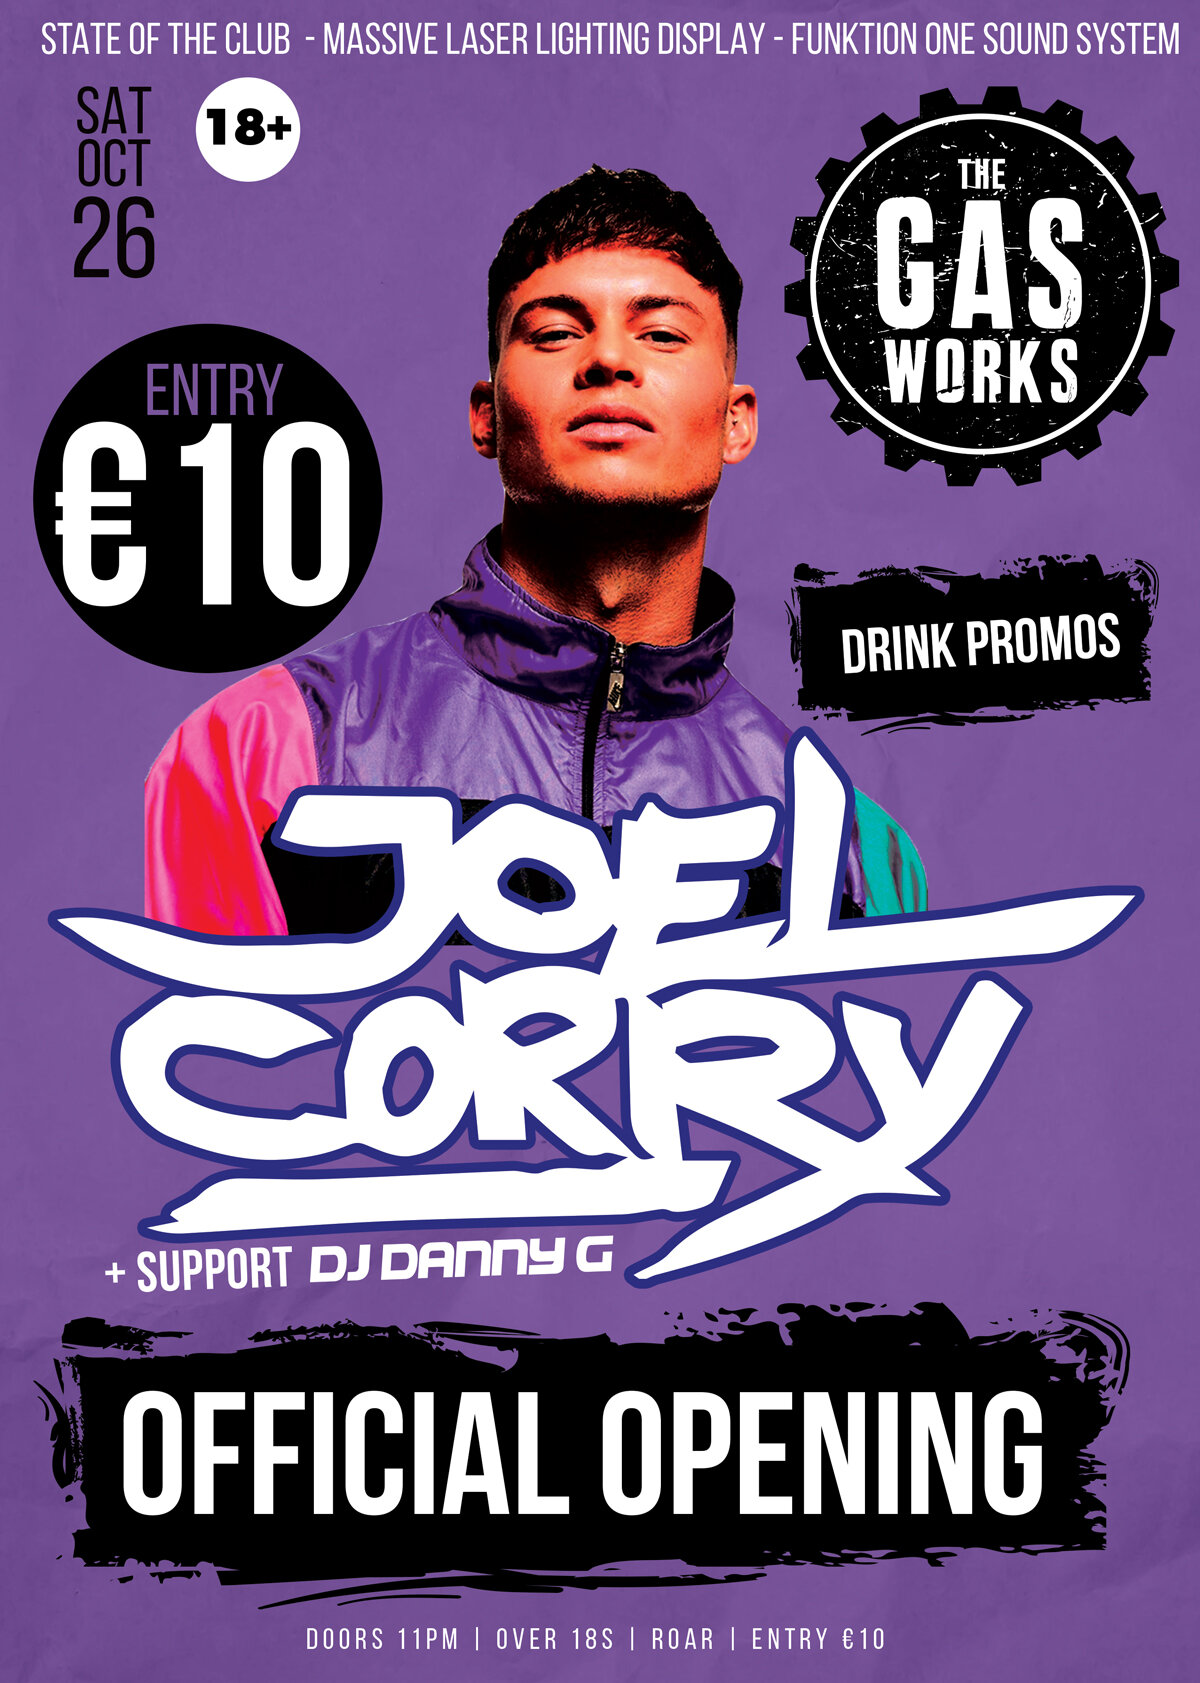 the-gasworks---dj-JOEL-CORRY-OFFICIAL-OPENING-PARTY-SAT-OCT-26--2019.jpg